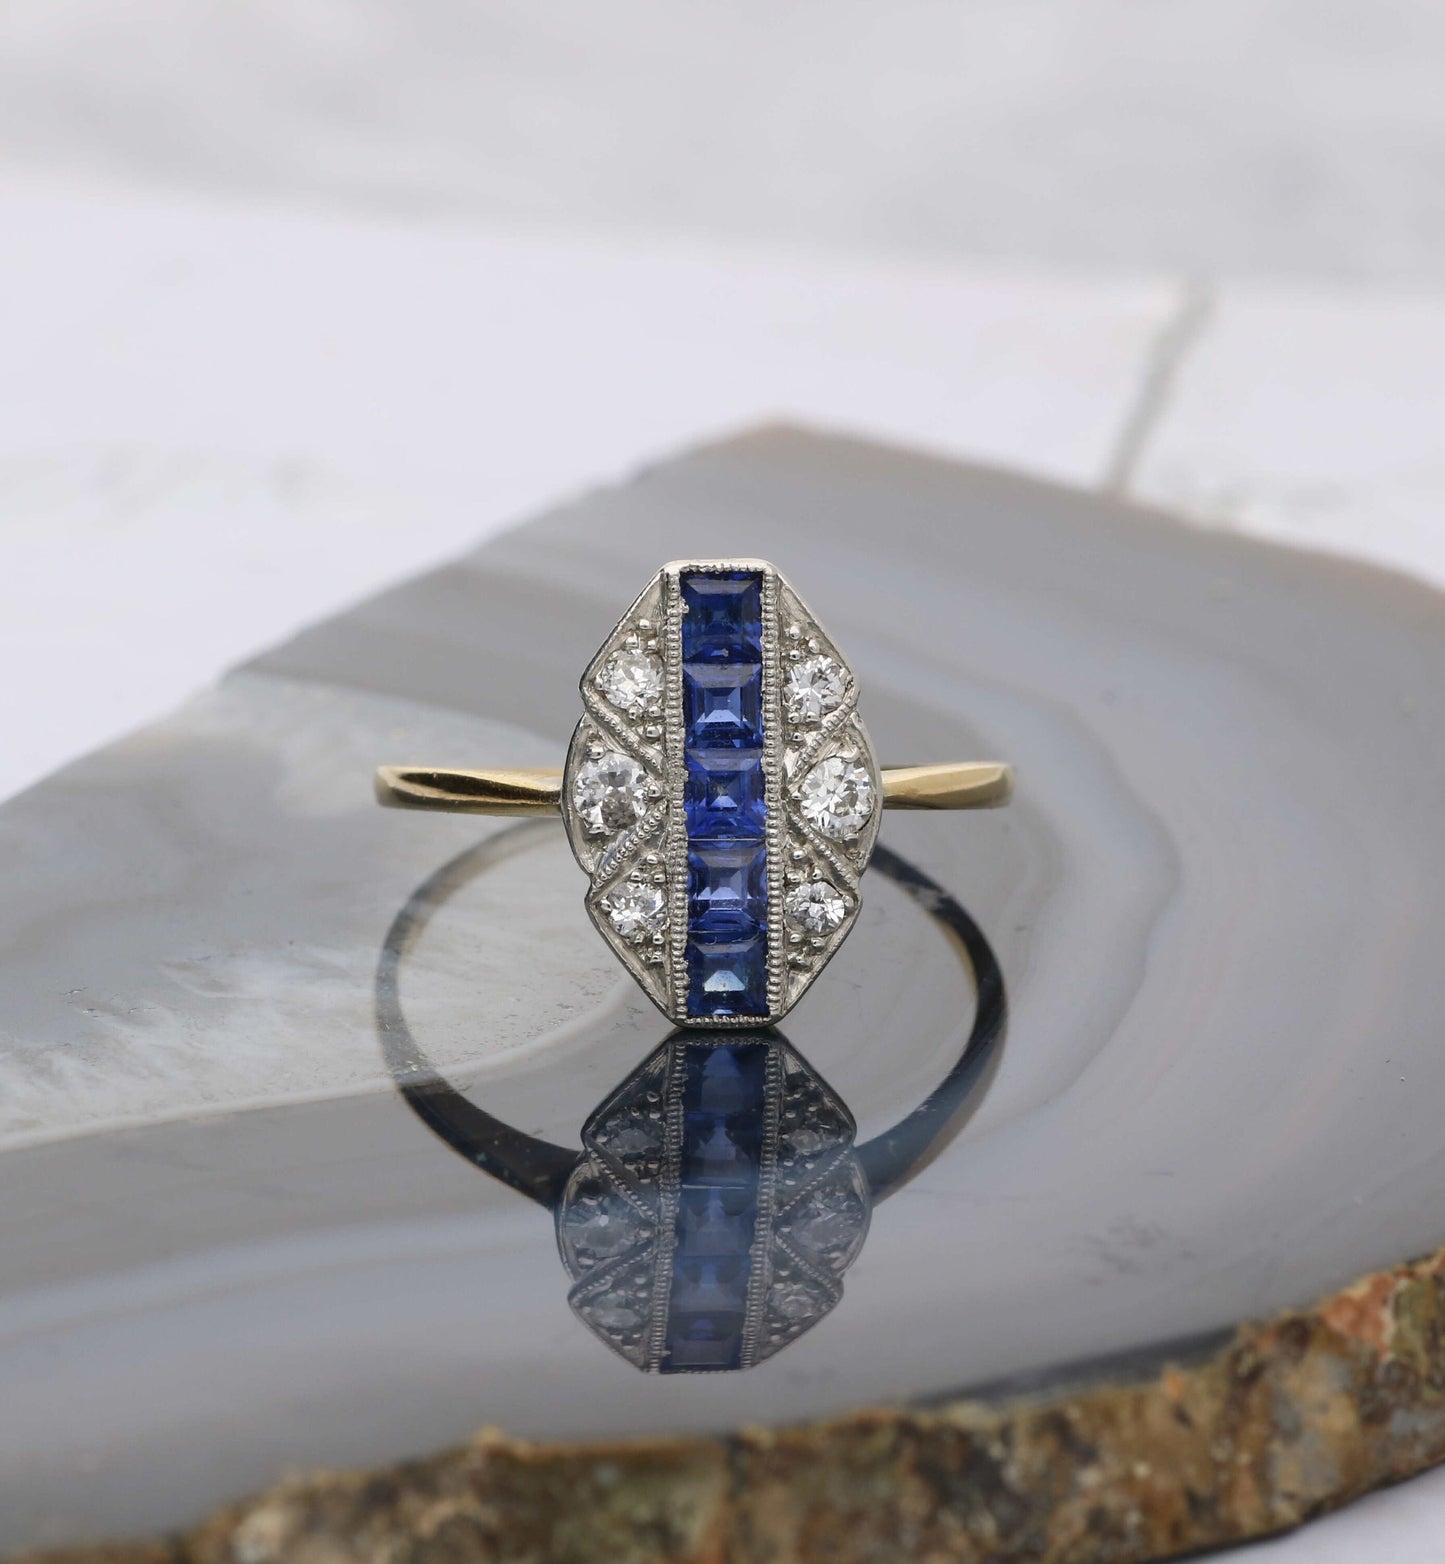 Antique sapphire and diamond deco cluster ring